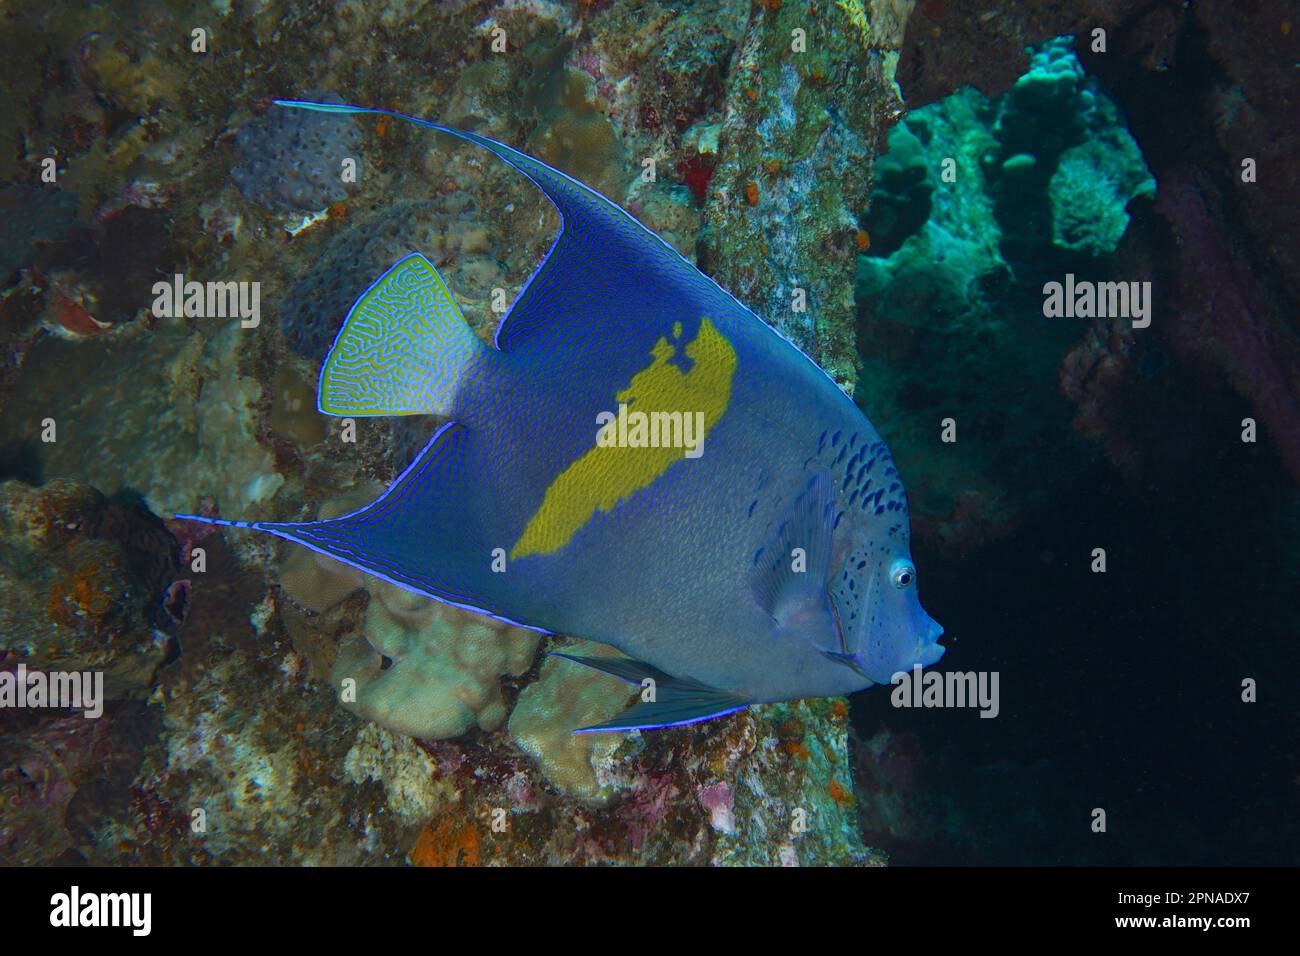 Halfmoon angelfish (Pomacanthus maculosus), Dive site Giannis D wreck, Hurghada, Egypt, Red Sea Stock Photo